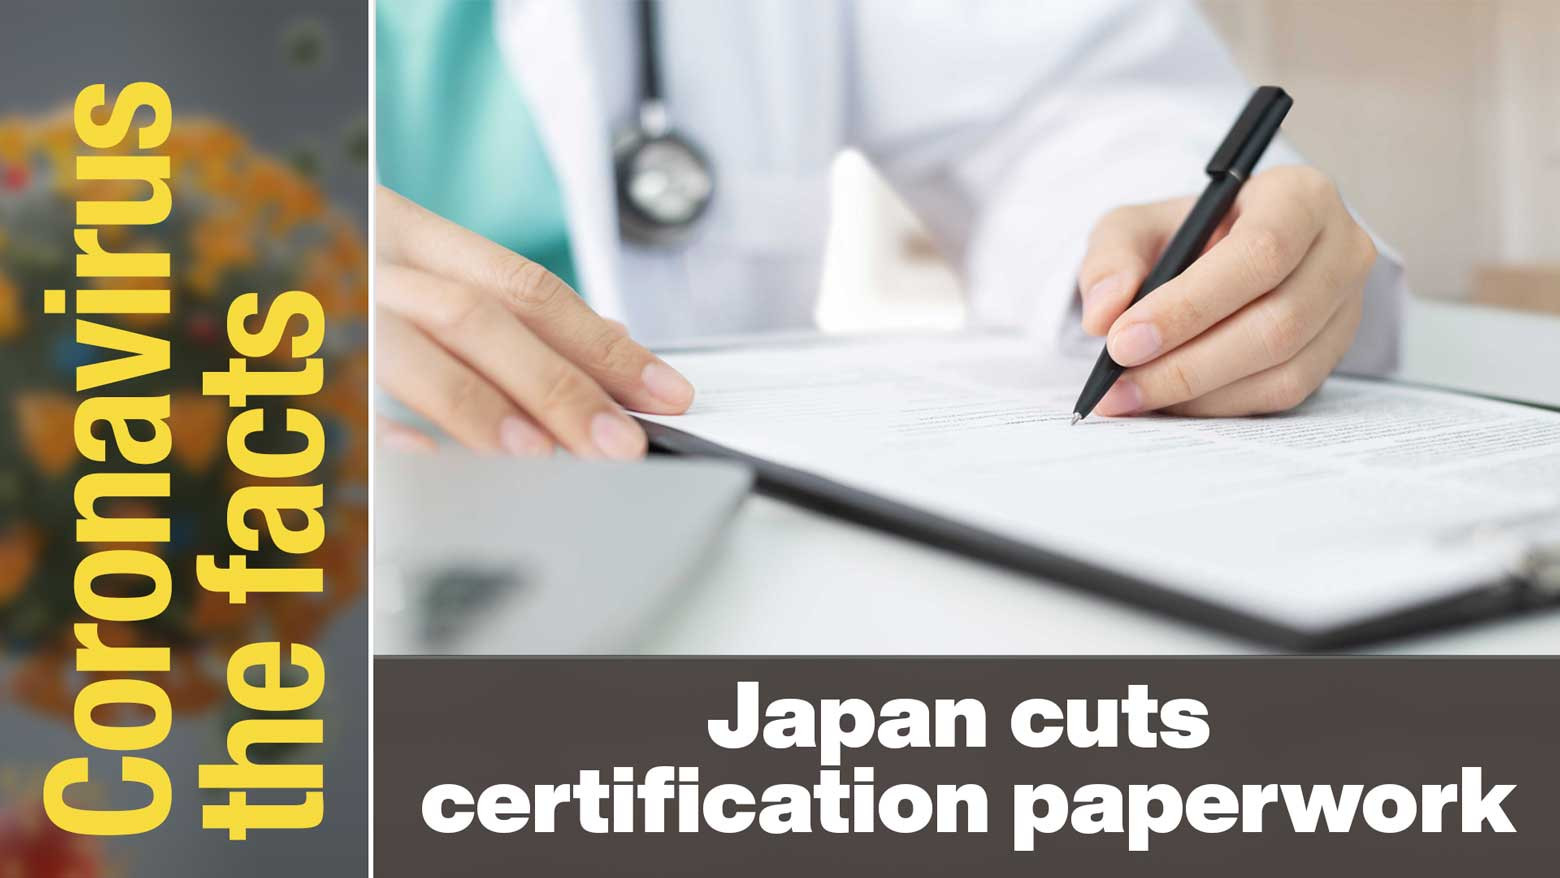 Japanese govt. steps in to relieve clinics of admin burden